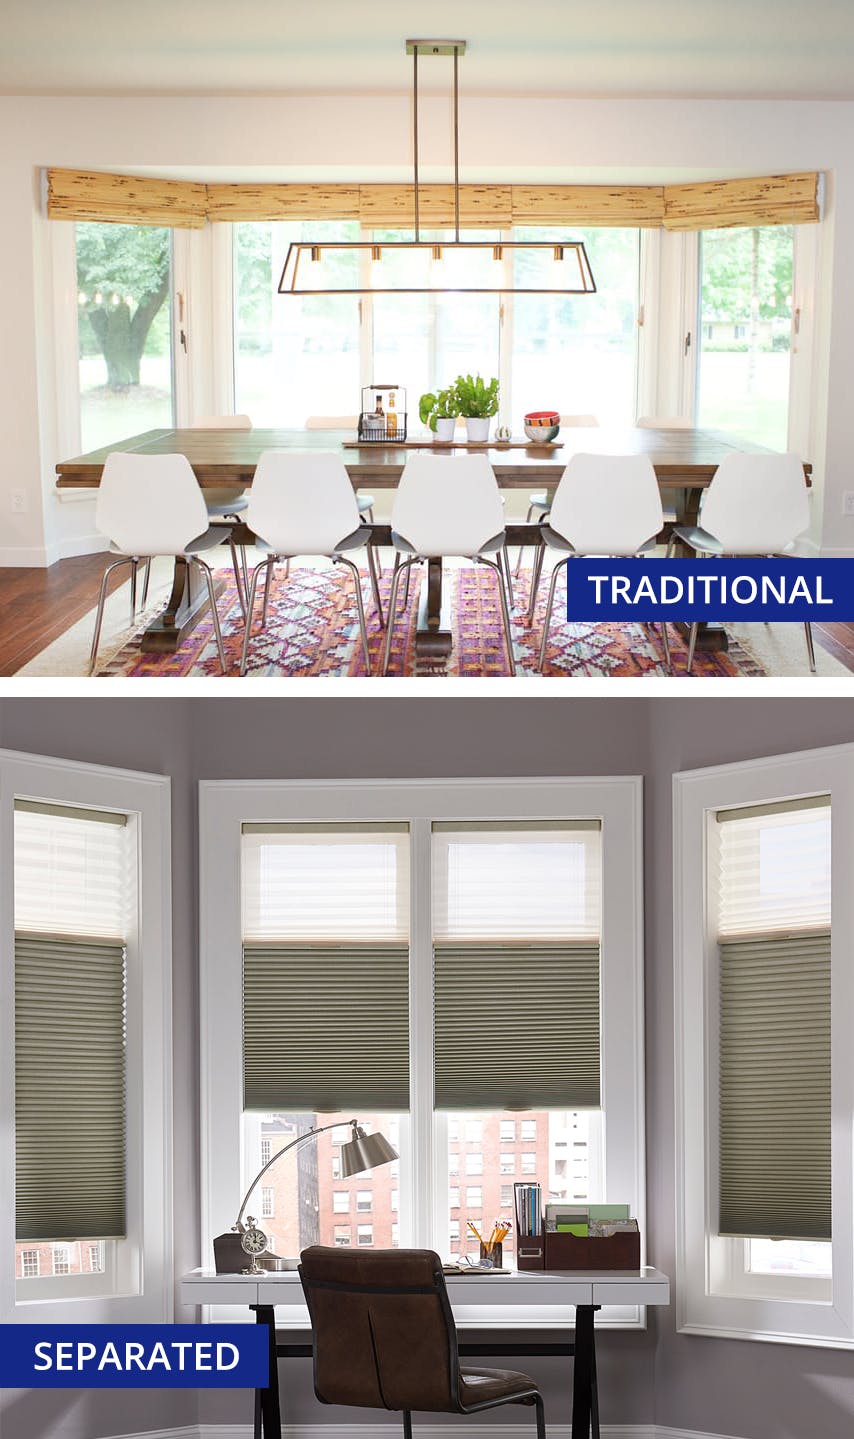 What Are the Best Materials for Your Window Blinds?